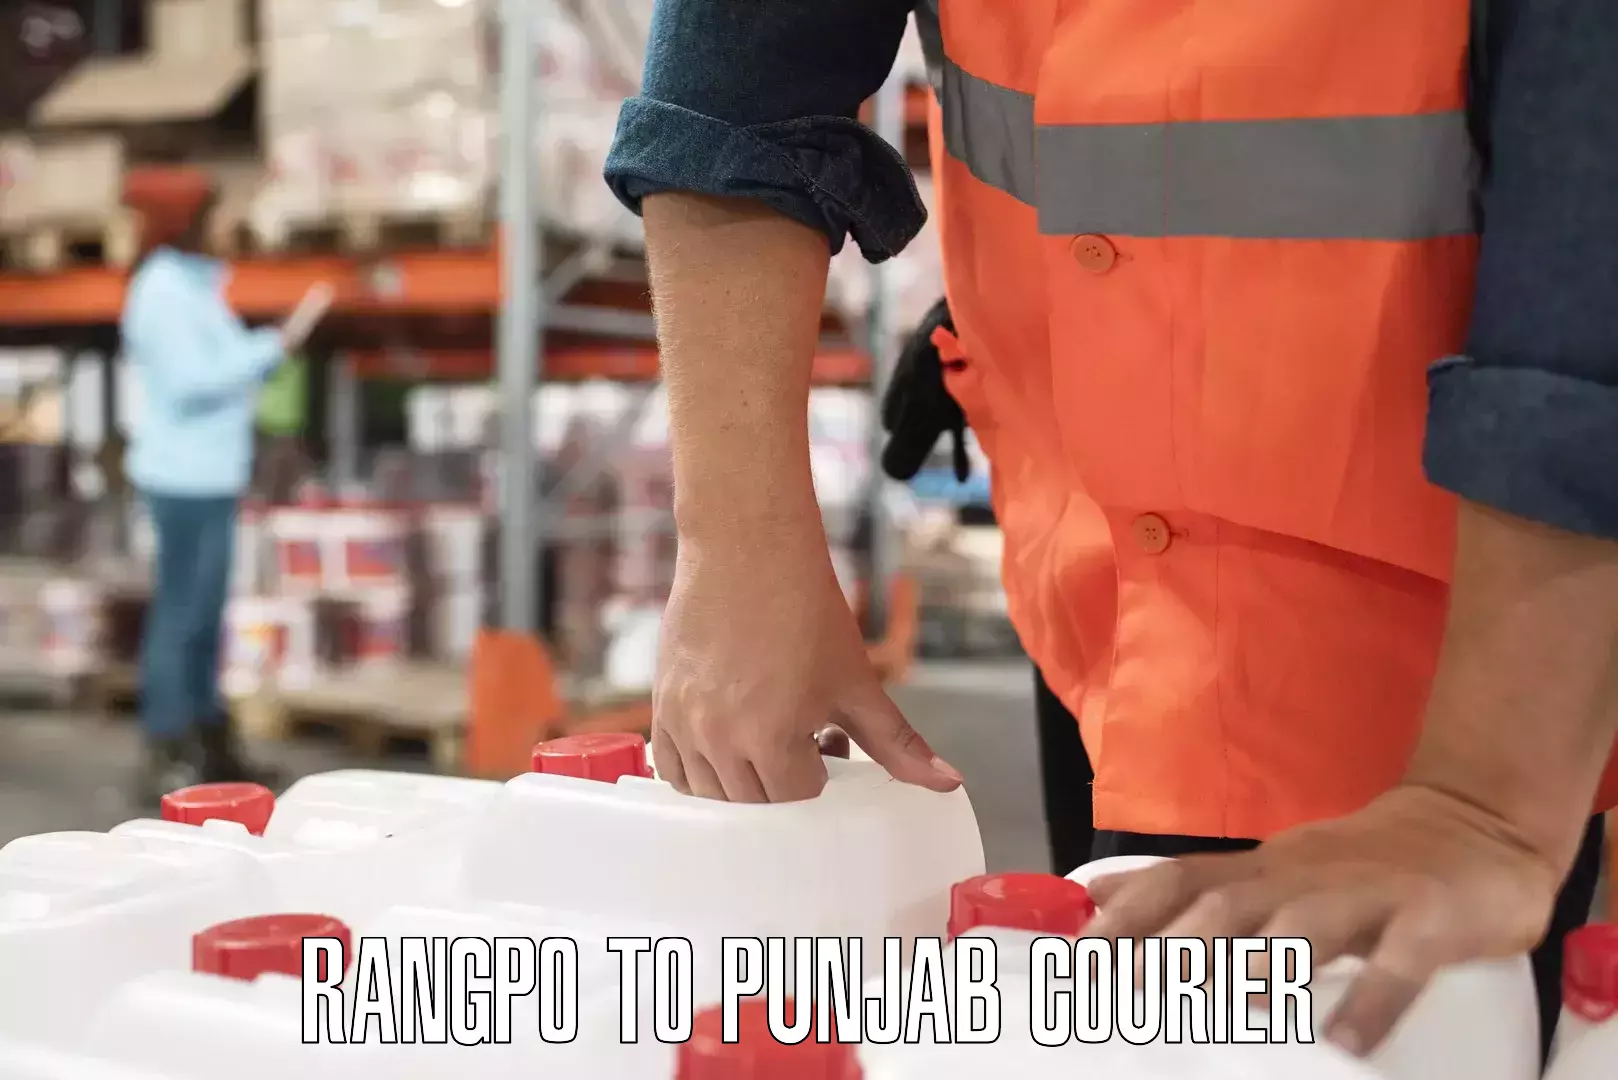 Nationwide shipping services Rangpo to Punjab